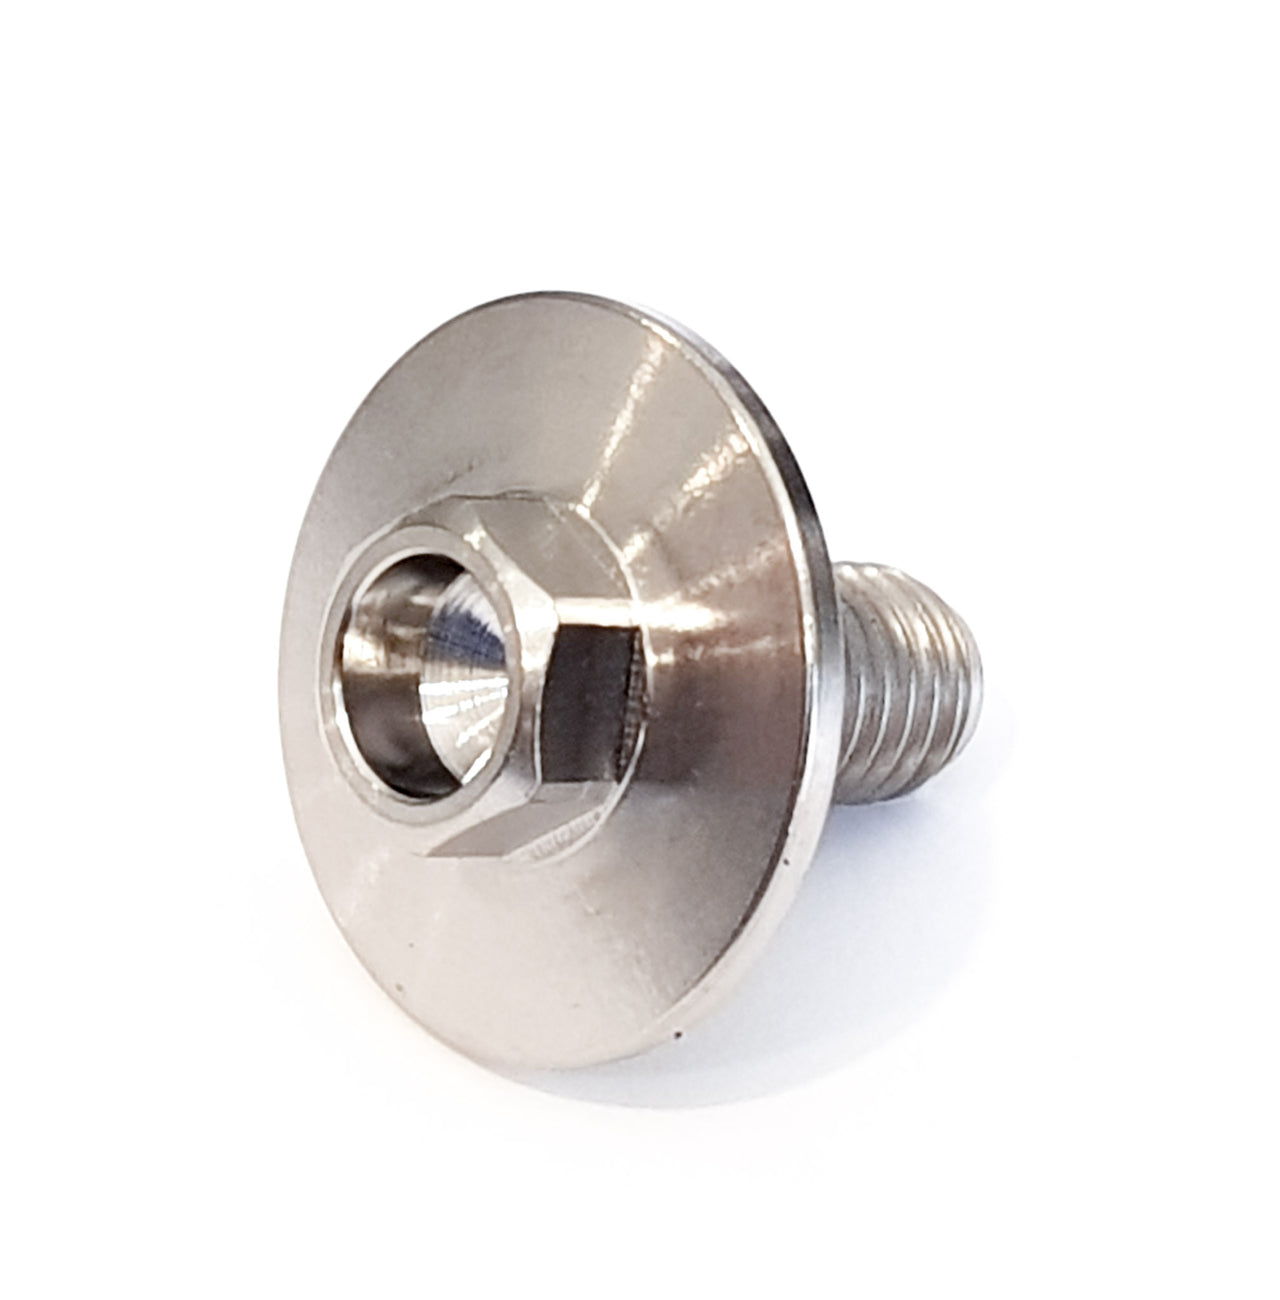 1/4 UNF .750" with large OD flange